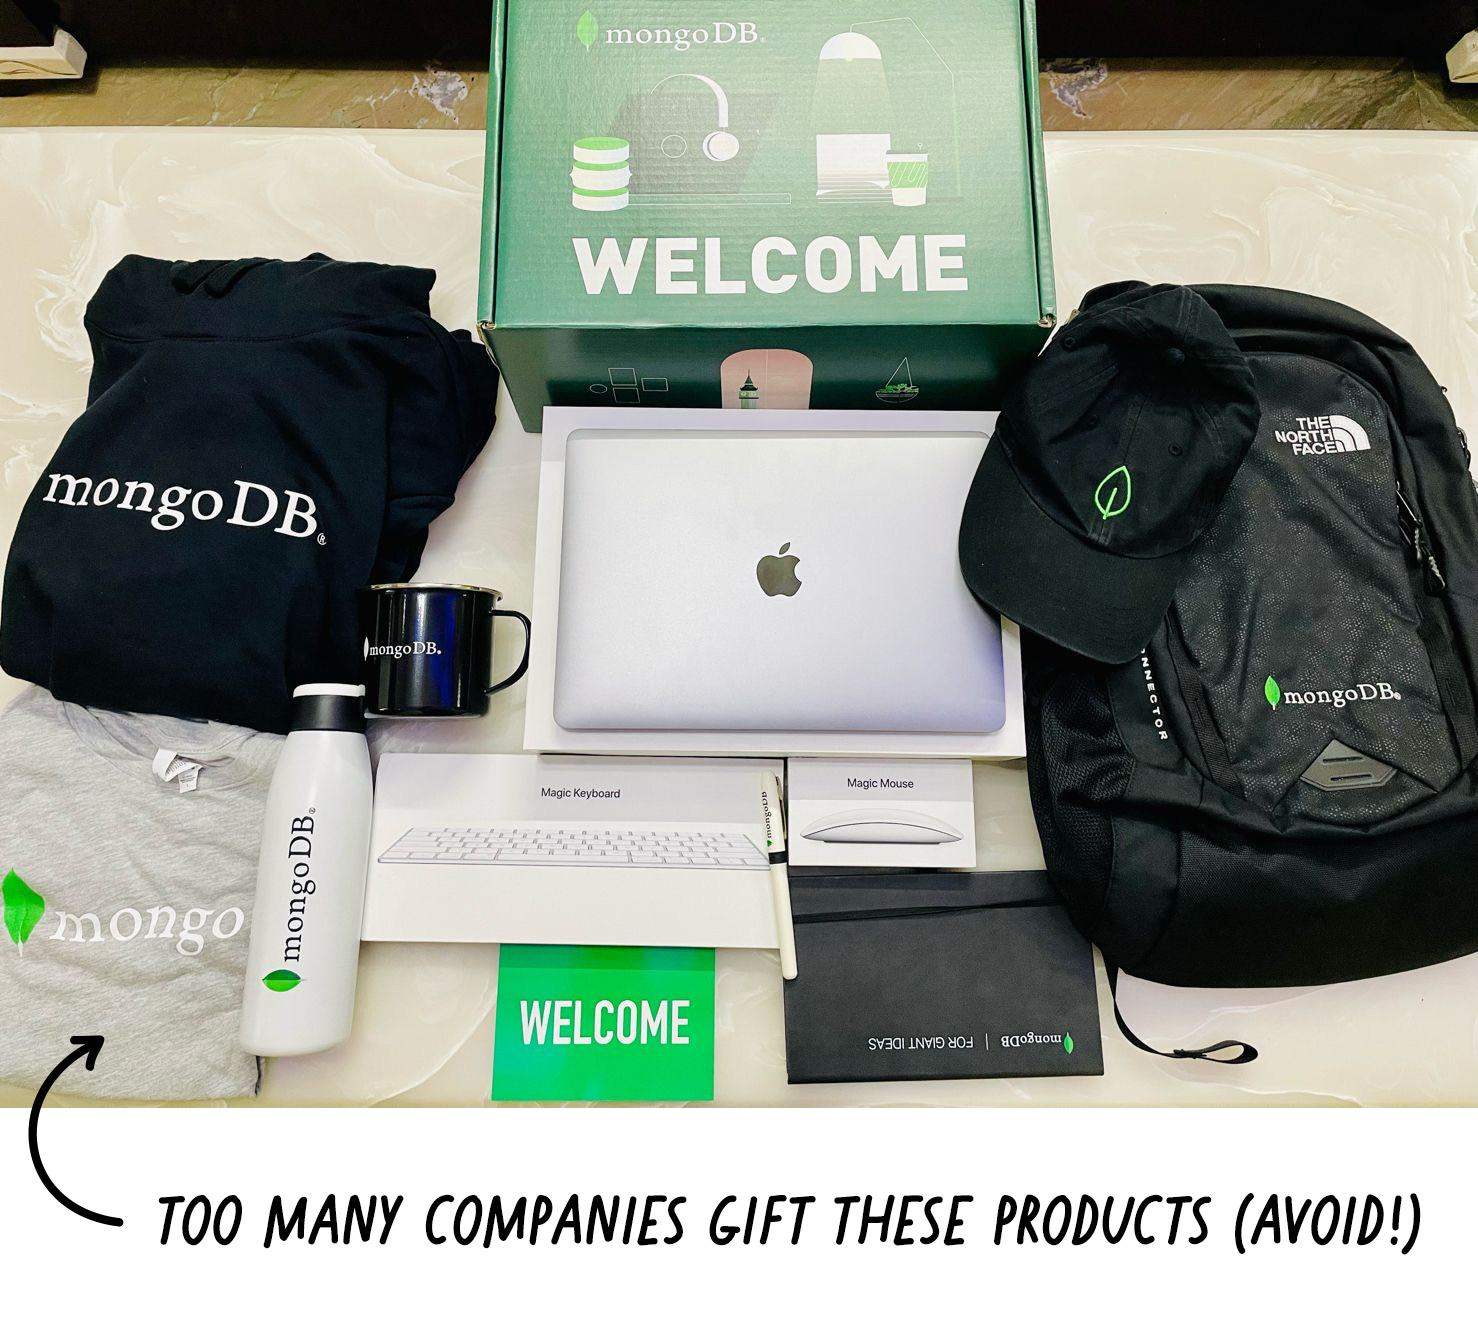 38 Best Swag Bag Ideas For Work, Events, & Clients [2023]